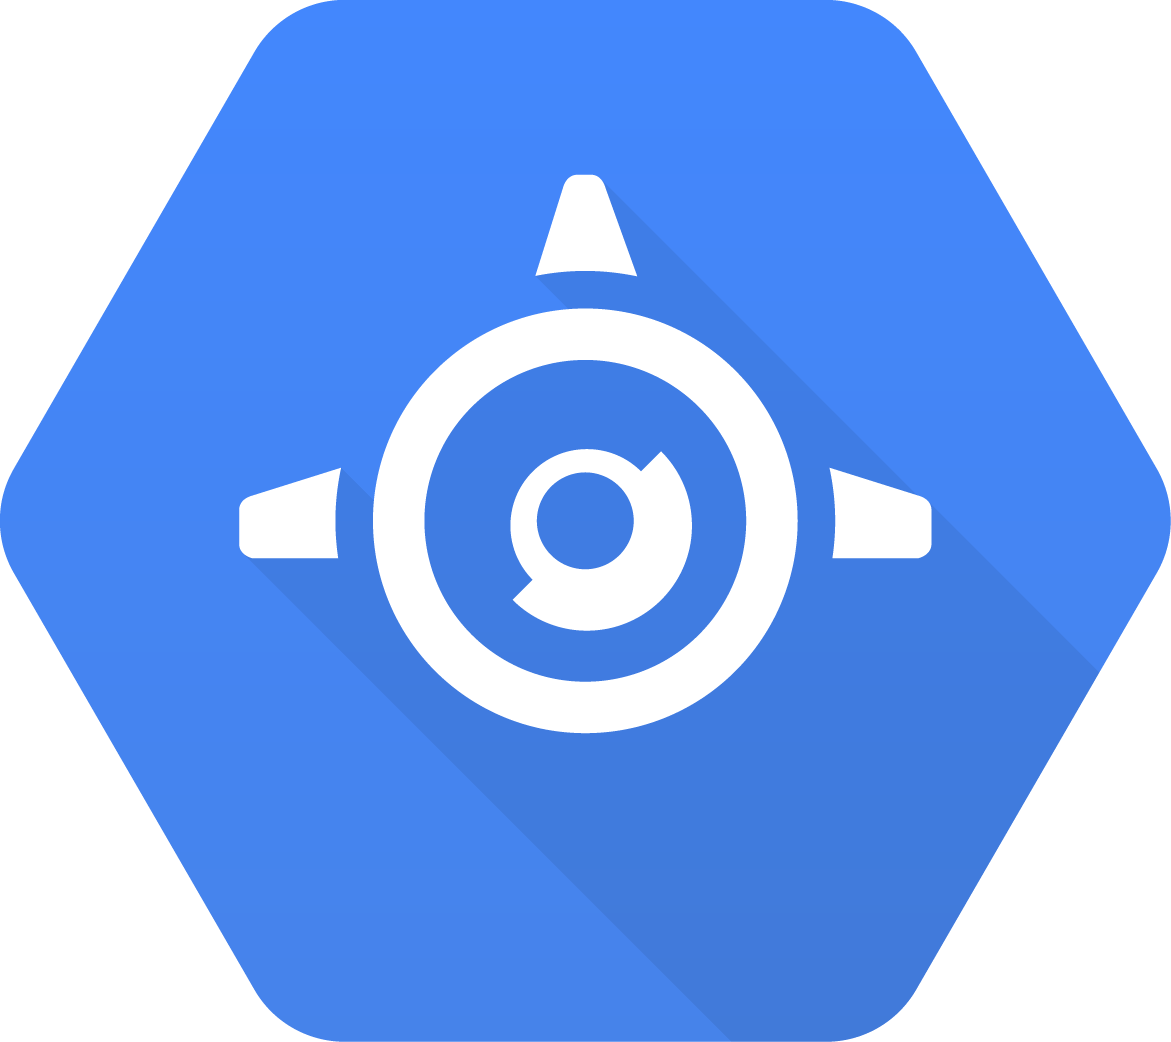 Powered by Google App Engine